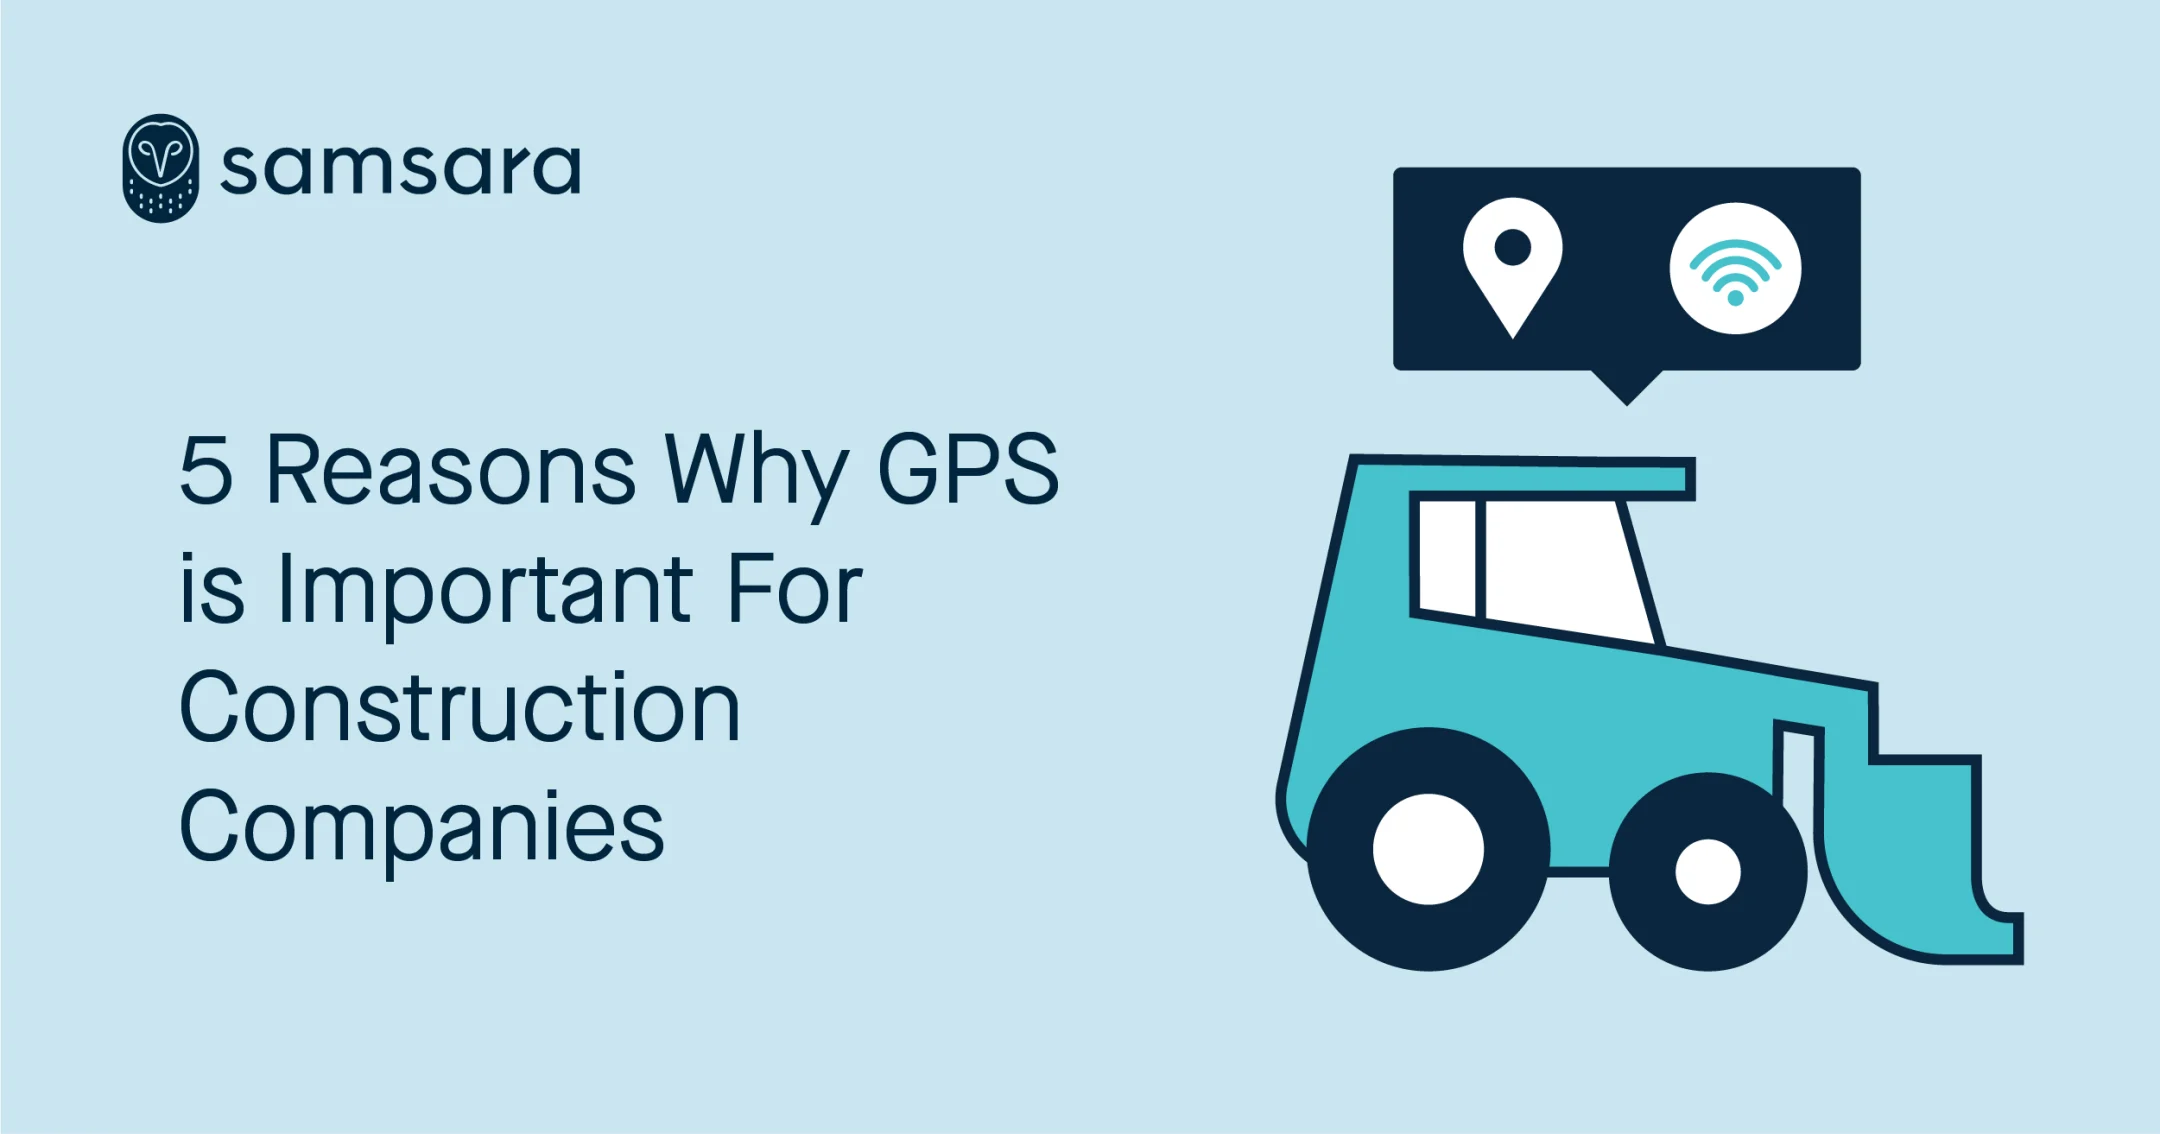 Why GPS is important for Construction Companies blue background, location icon, WiFi icon and construction illustration.